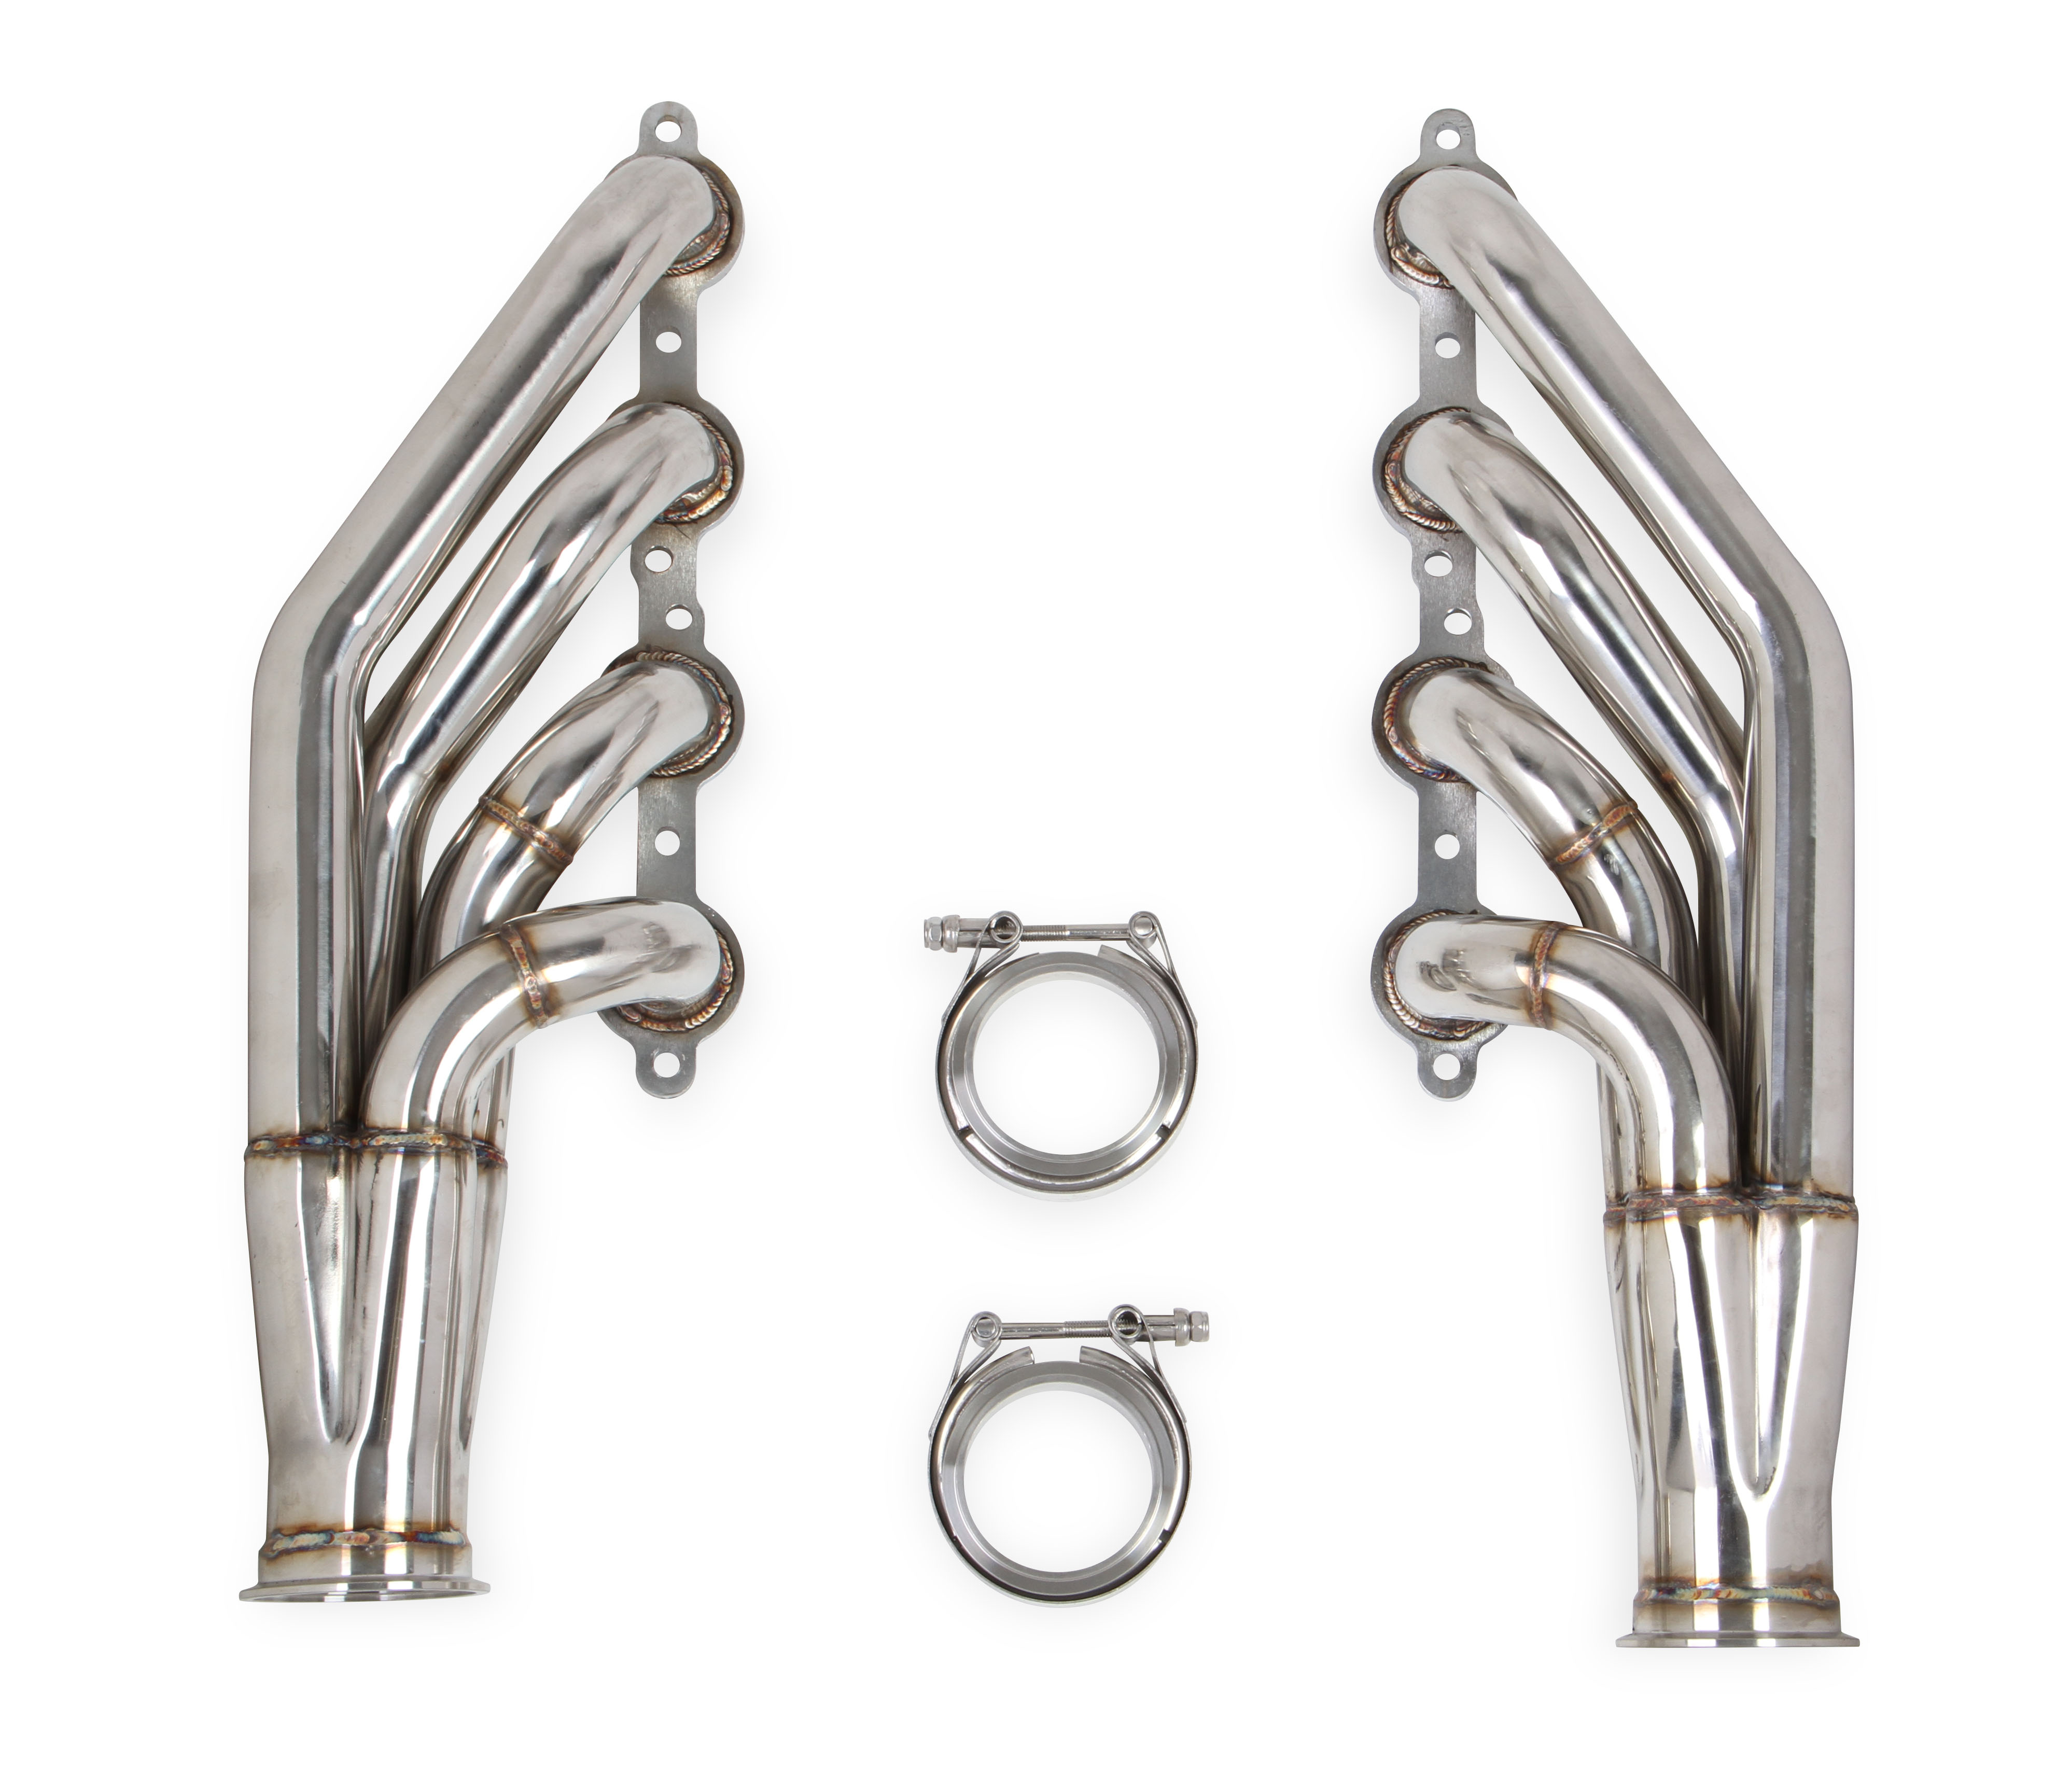 Flowtech LS 4.8L/5.3L/6.0L V8 1 7/8" 409 Stainless Turbo Headers - Natural Finish